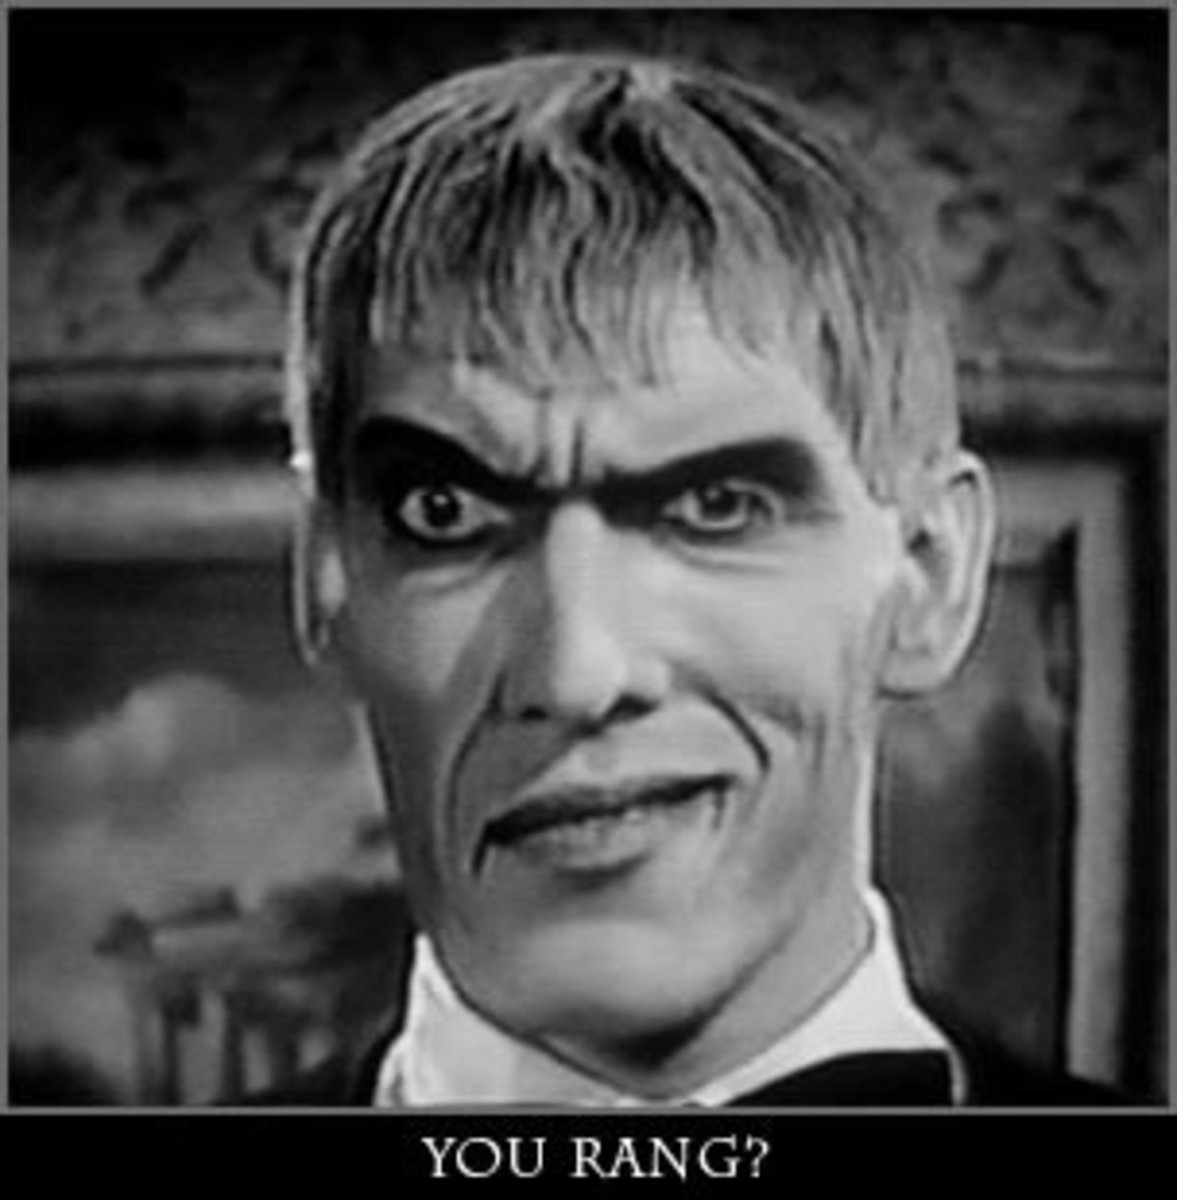 Lurch, the Butler